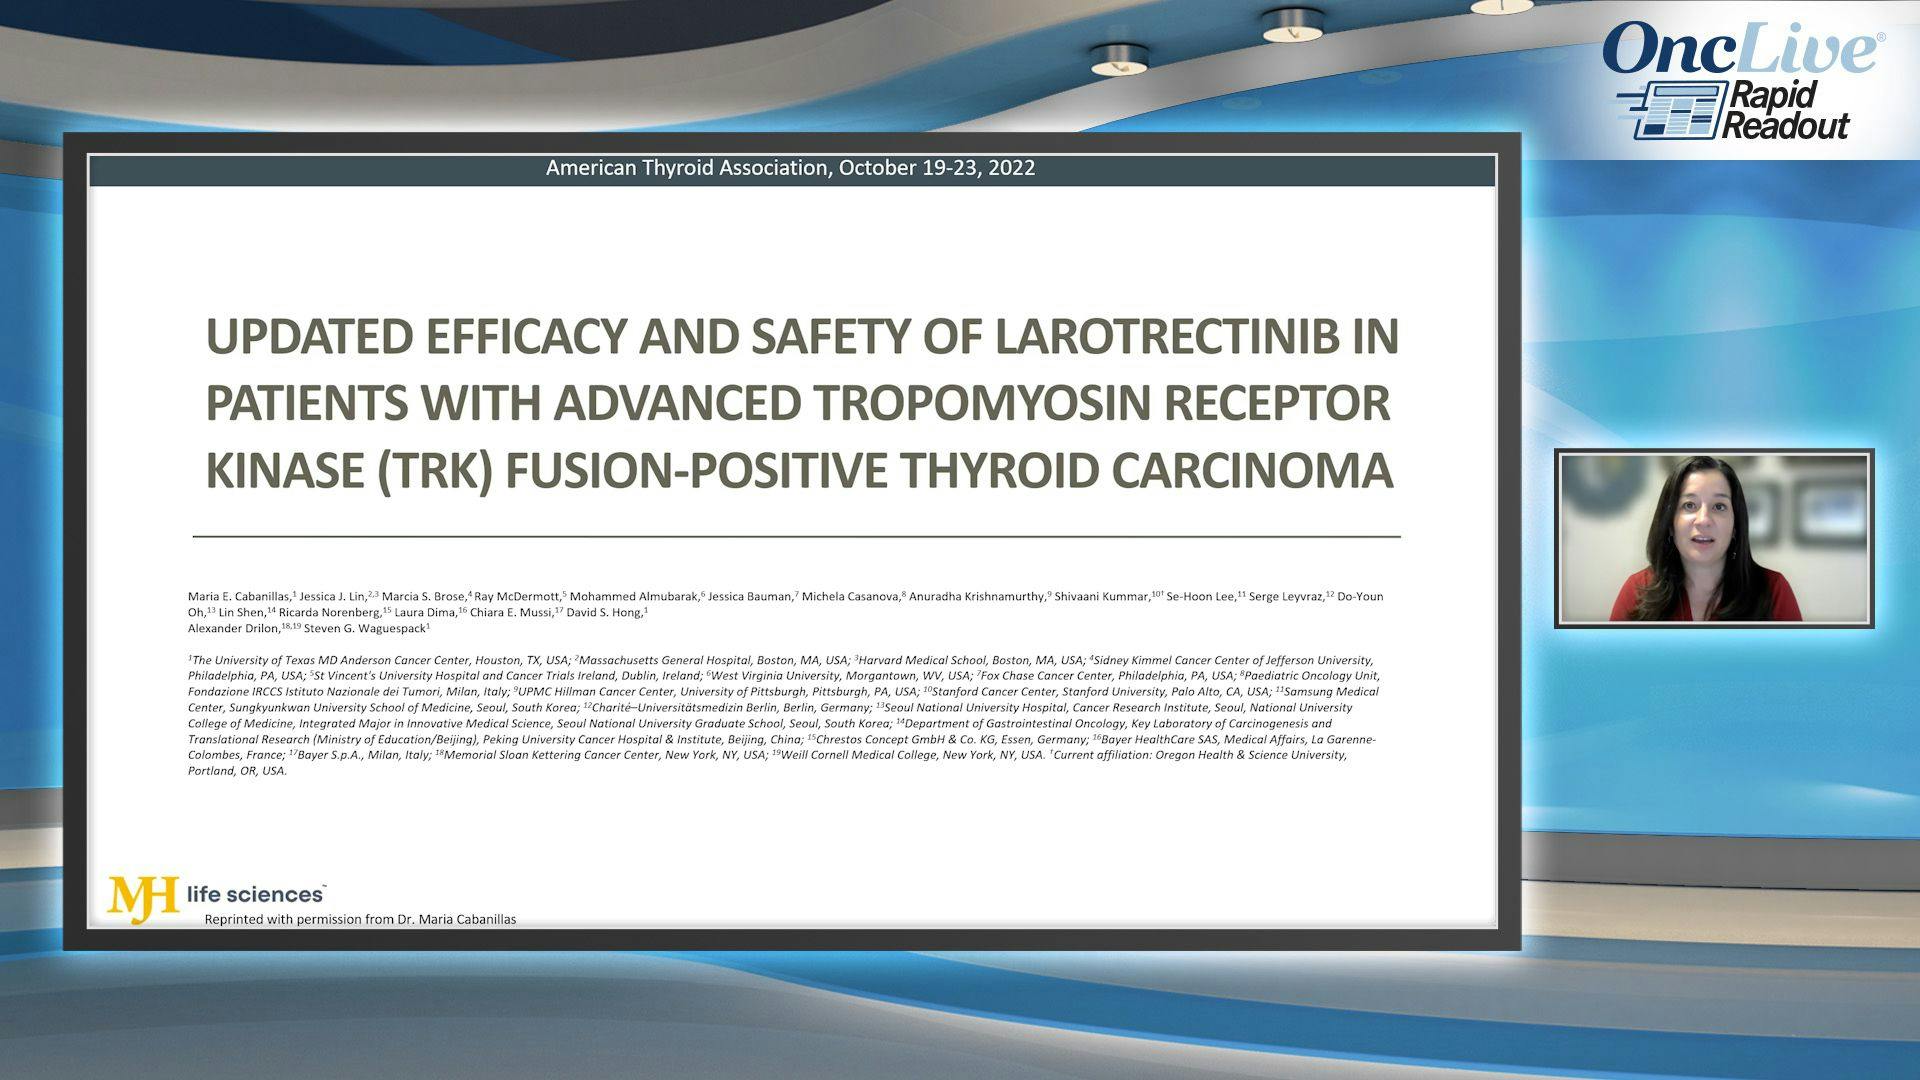 Updated Efficacy and Safety of Larotrectinib in Patients with Advanced Tropomyosin Receptor Kinase (TRK) Fusion Positive Thyroid Carcinoma